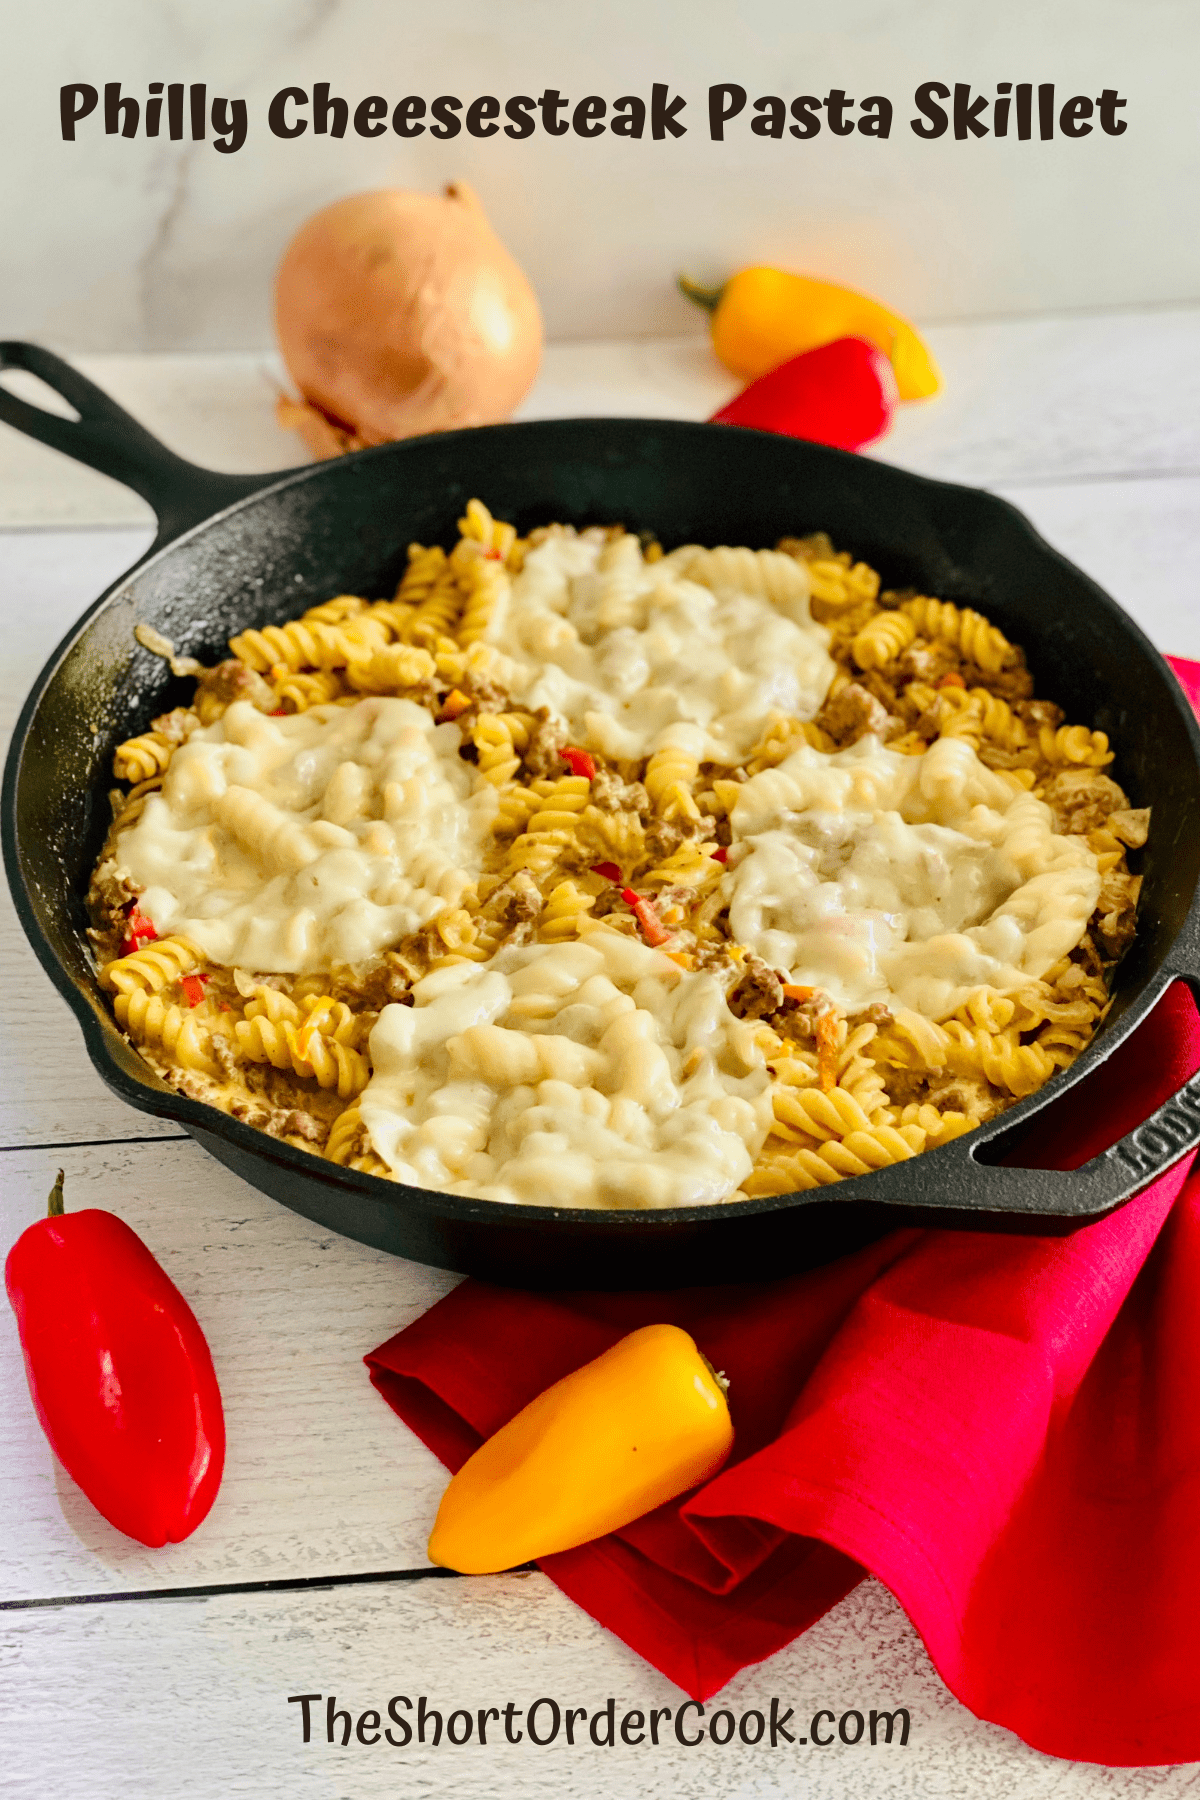 Philly Cheesesteak Pasta Skillet Ready to eat topped with melted cheese.